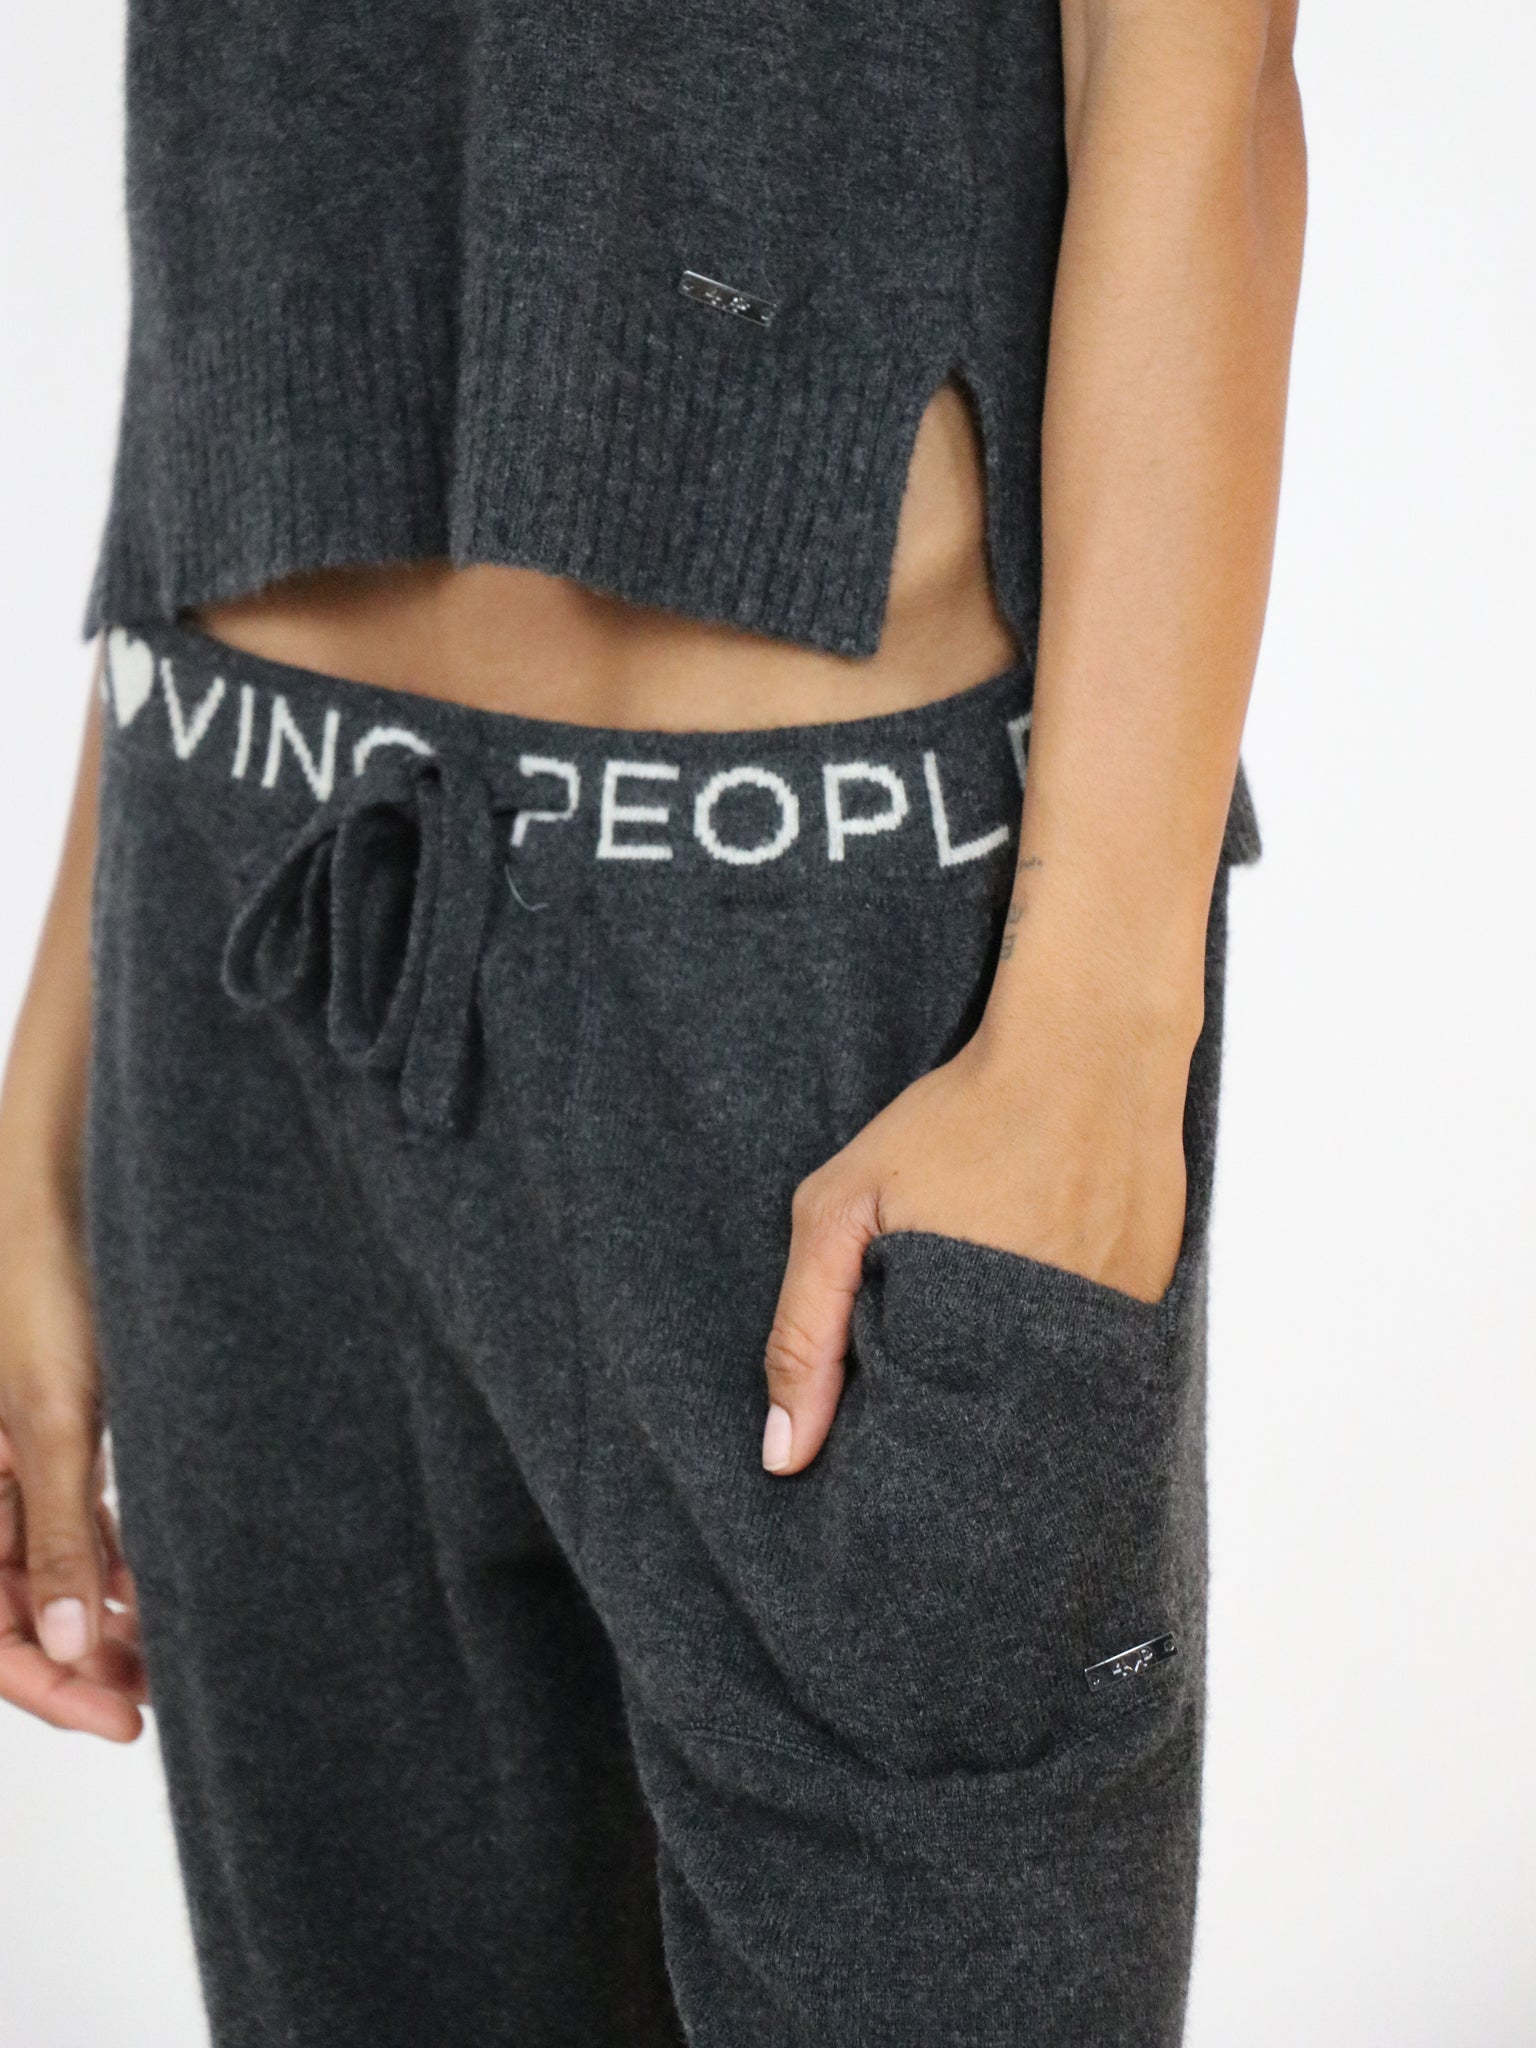 Cashmere Sweatpants with Intarsia at waistband